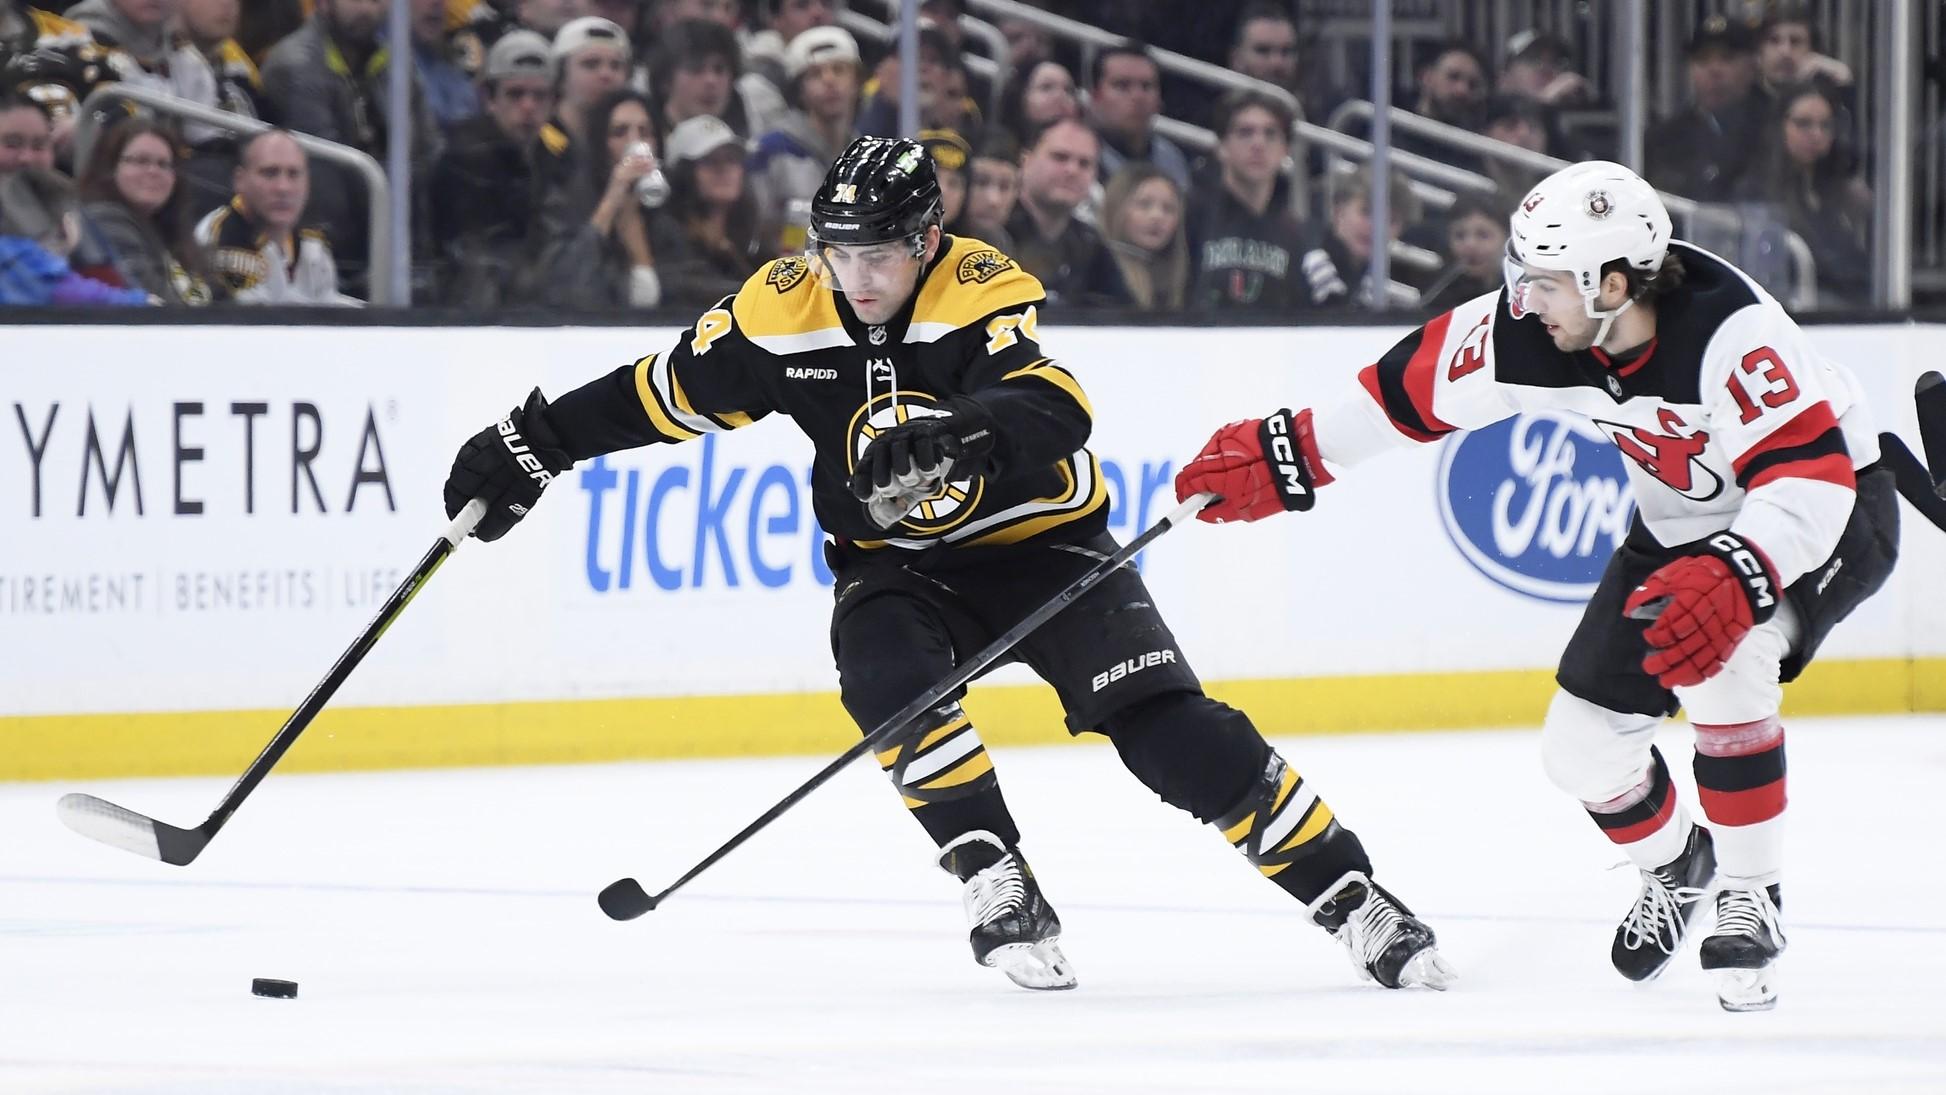 Apr 8, 2023; Boston, Massachusetts, USA; New Jersey Devils center Nico Hischier (13) tries to poke the puck away from Boston Bruins left wing Jake DeBrusk (74) during the first period at TD Garden. / Bob DeChiara-USA TODAY Sports